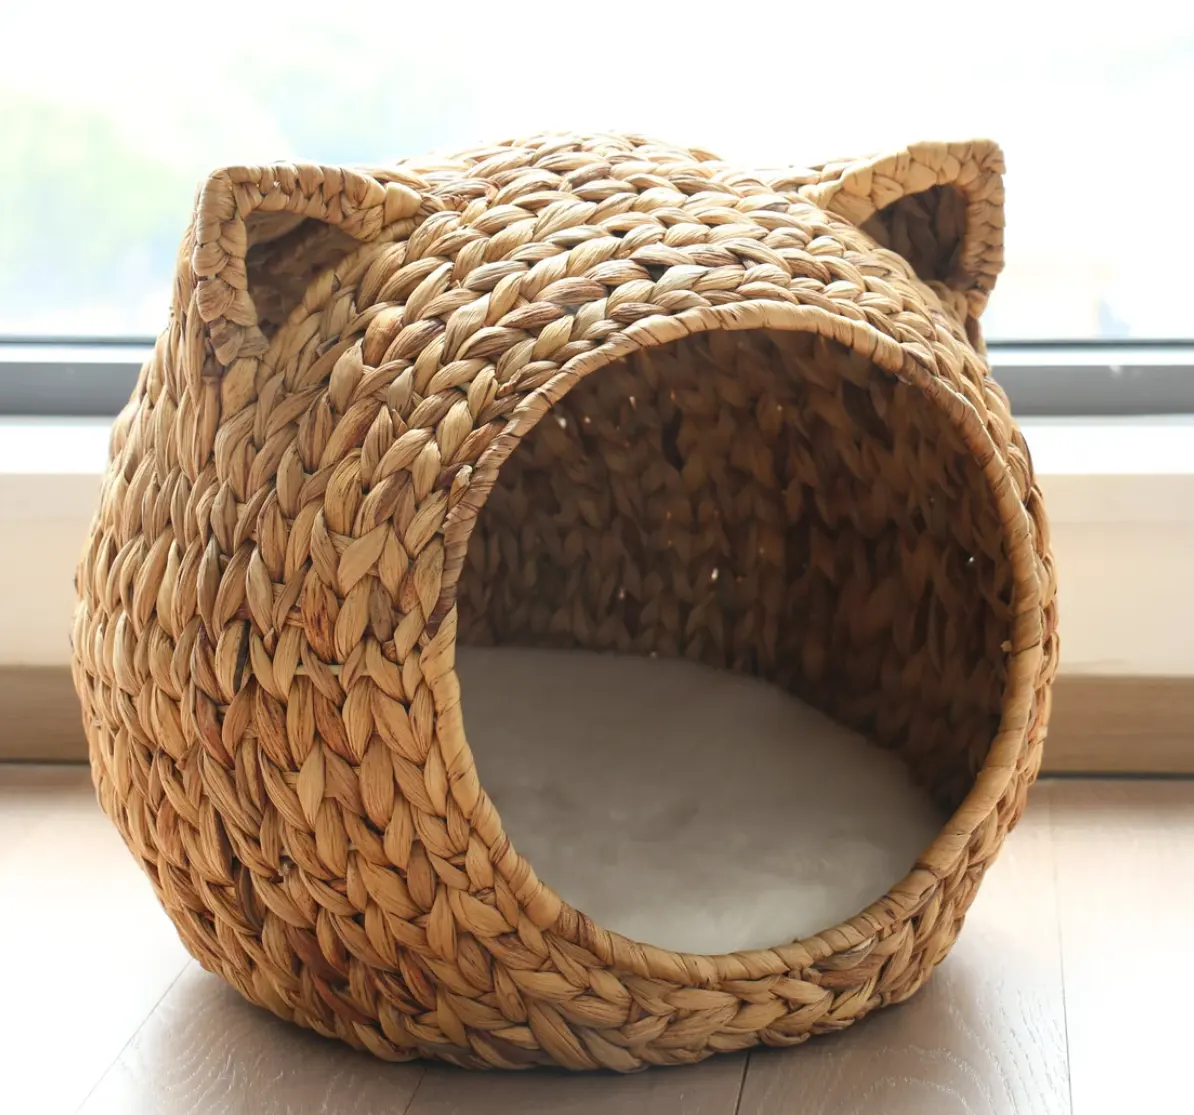 water hyacinth straw indoor outdoor scratcher removable washable cage water hyacinth pet bed dog house wood rattan cat house